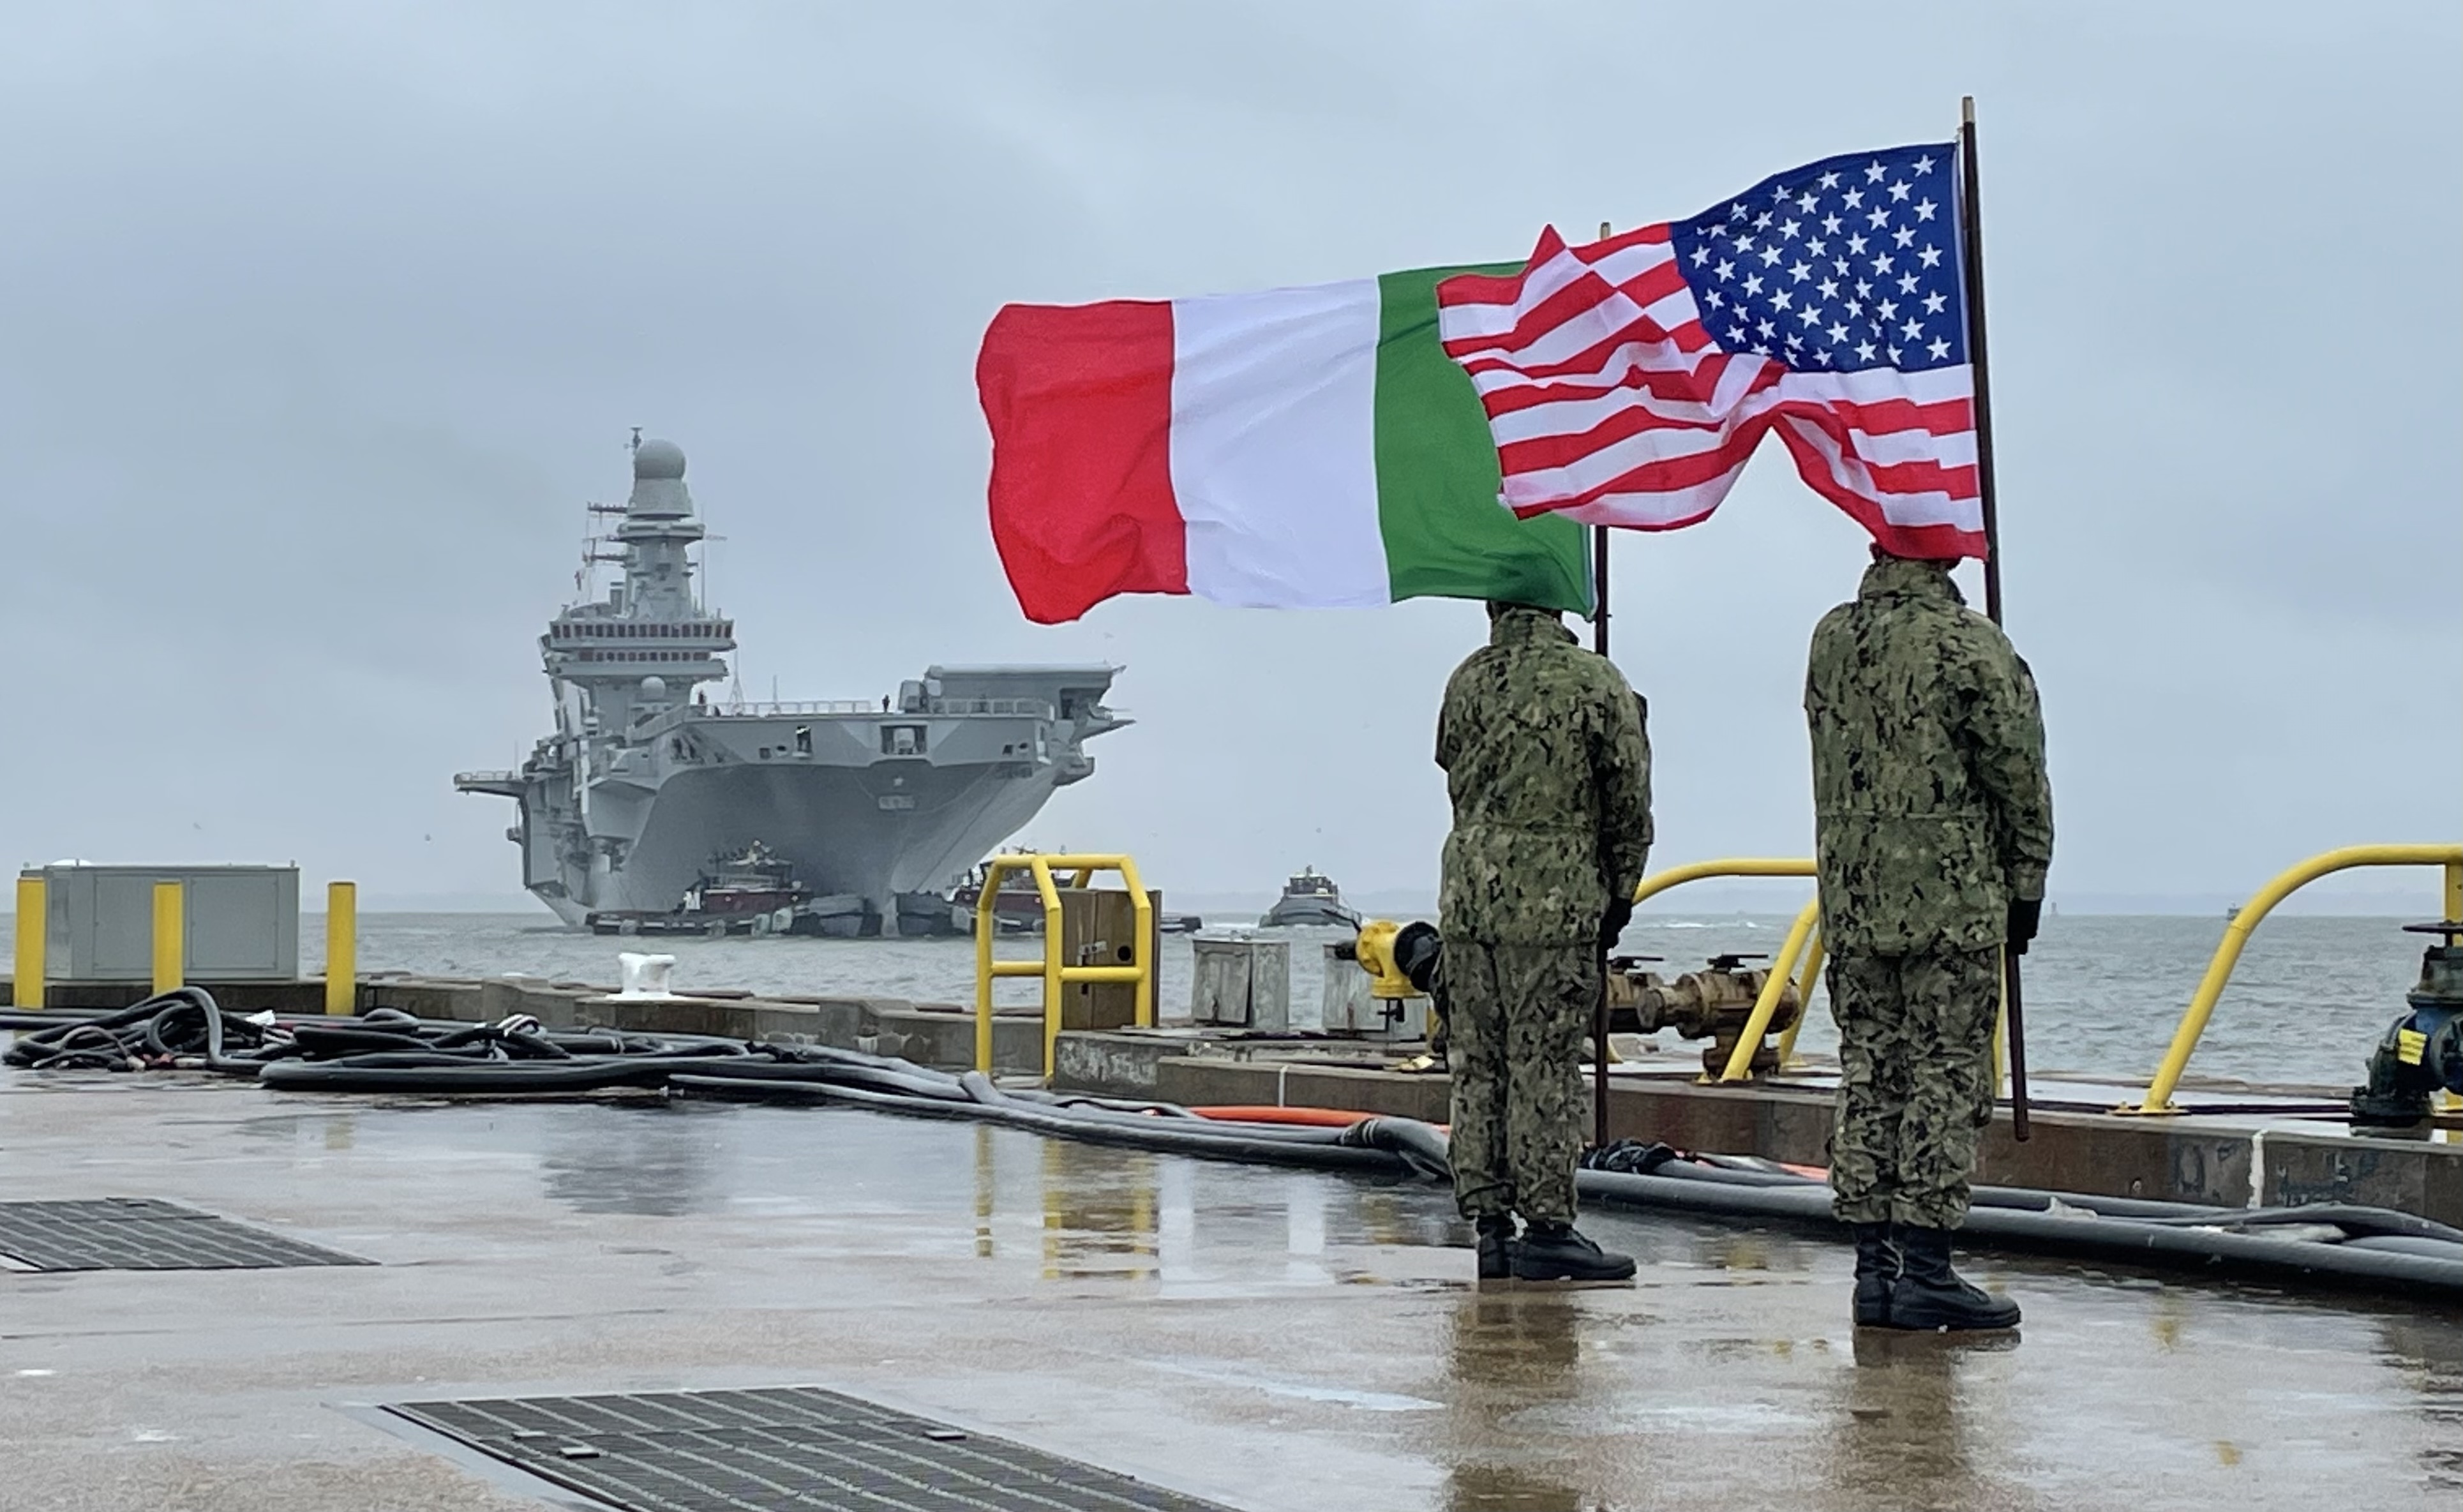 Italian Navy Aircraft Carrier ITS Cavour (CVH 550) Arrives at US Naval Station Norfolk